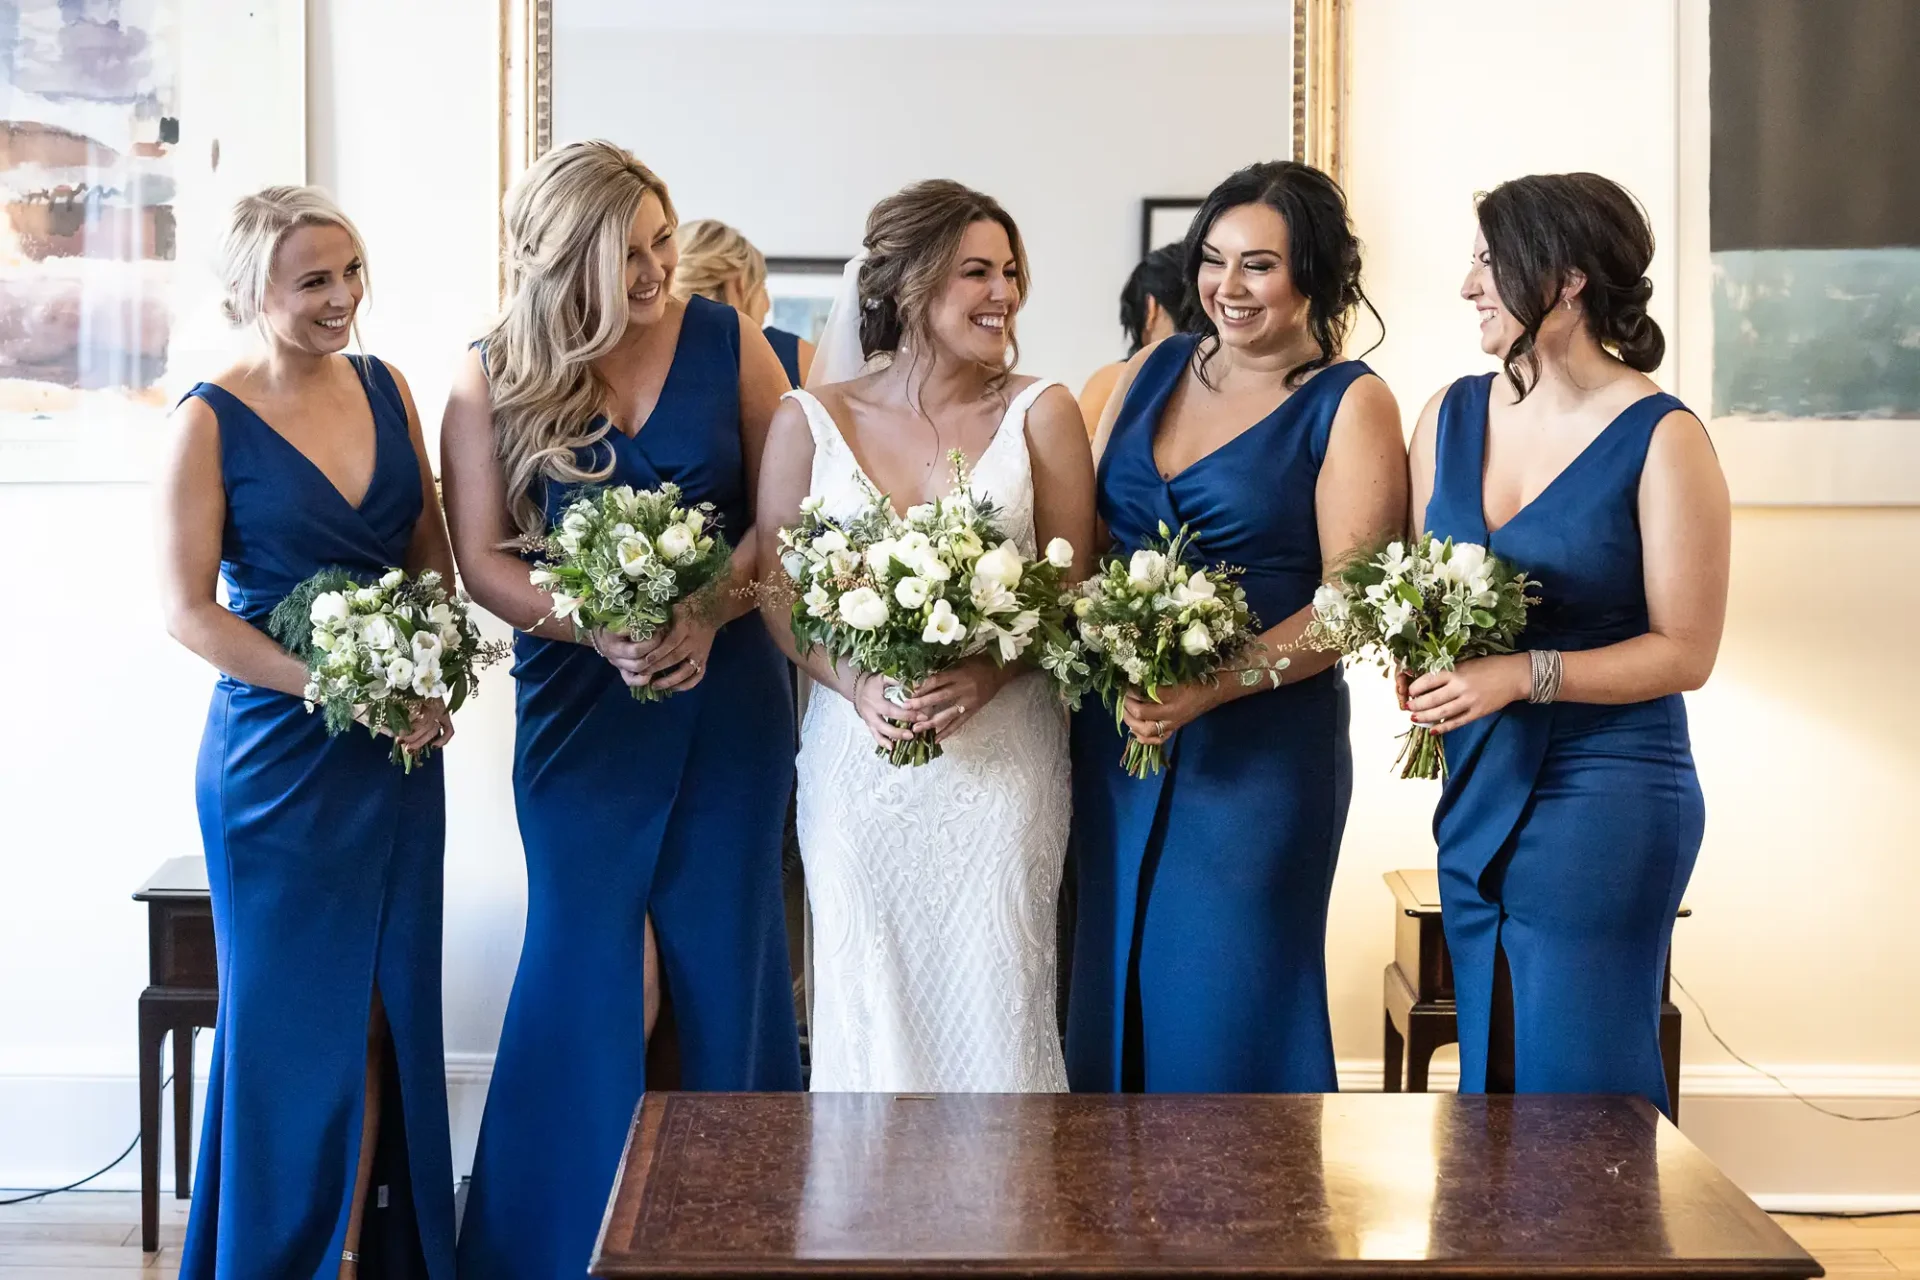 Five women in blue dresses, holding bouquets and smiling joyously, stand beside a bride in a white gown.